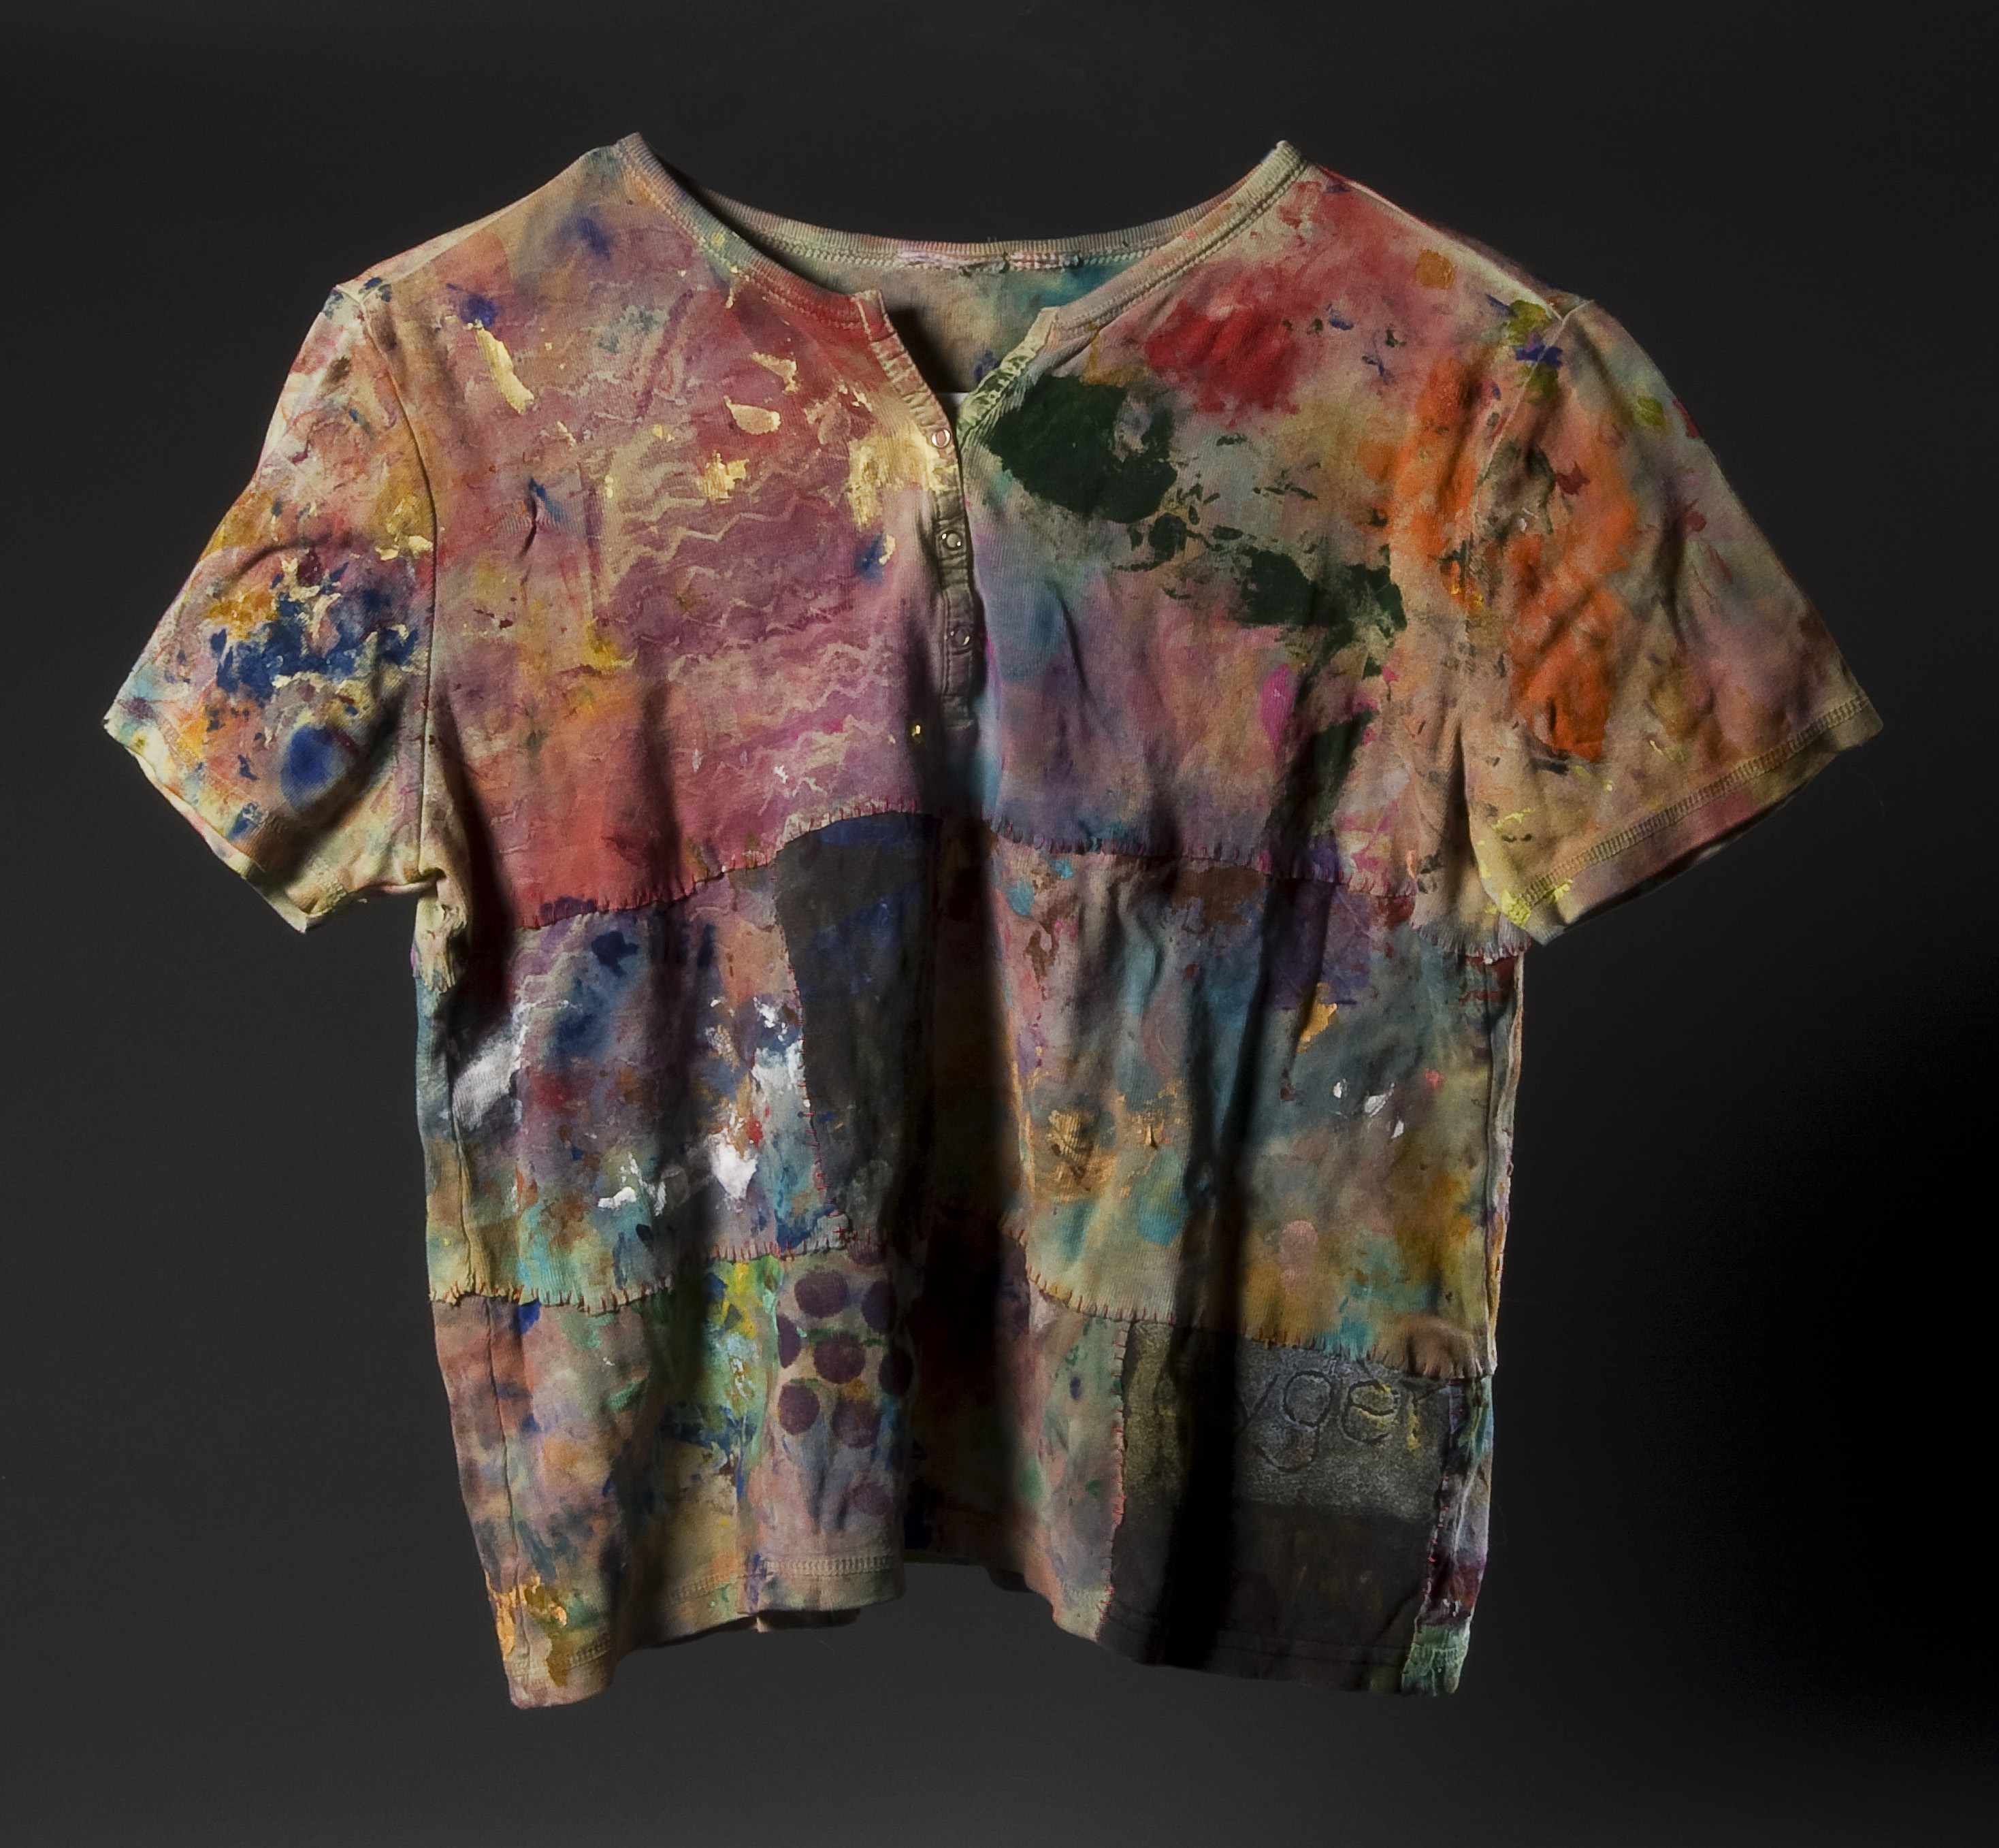 painting rag shirts, acrylic, painting, painting rags, sewing, thread, putting pieces back together, making a painting, shirts, t-shirts, sleeves, colors, paint, cleaning brushes, recycling, repurposing, painting history, wearable art, wearable paintings